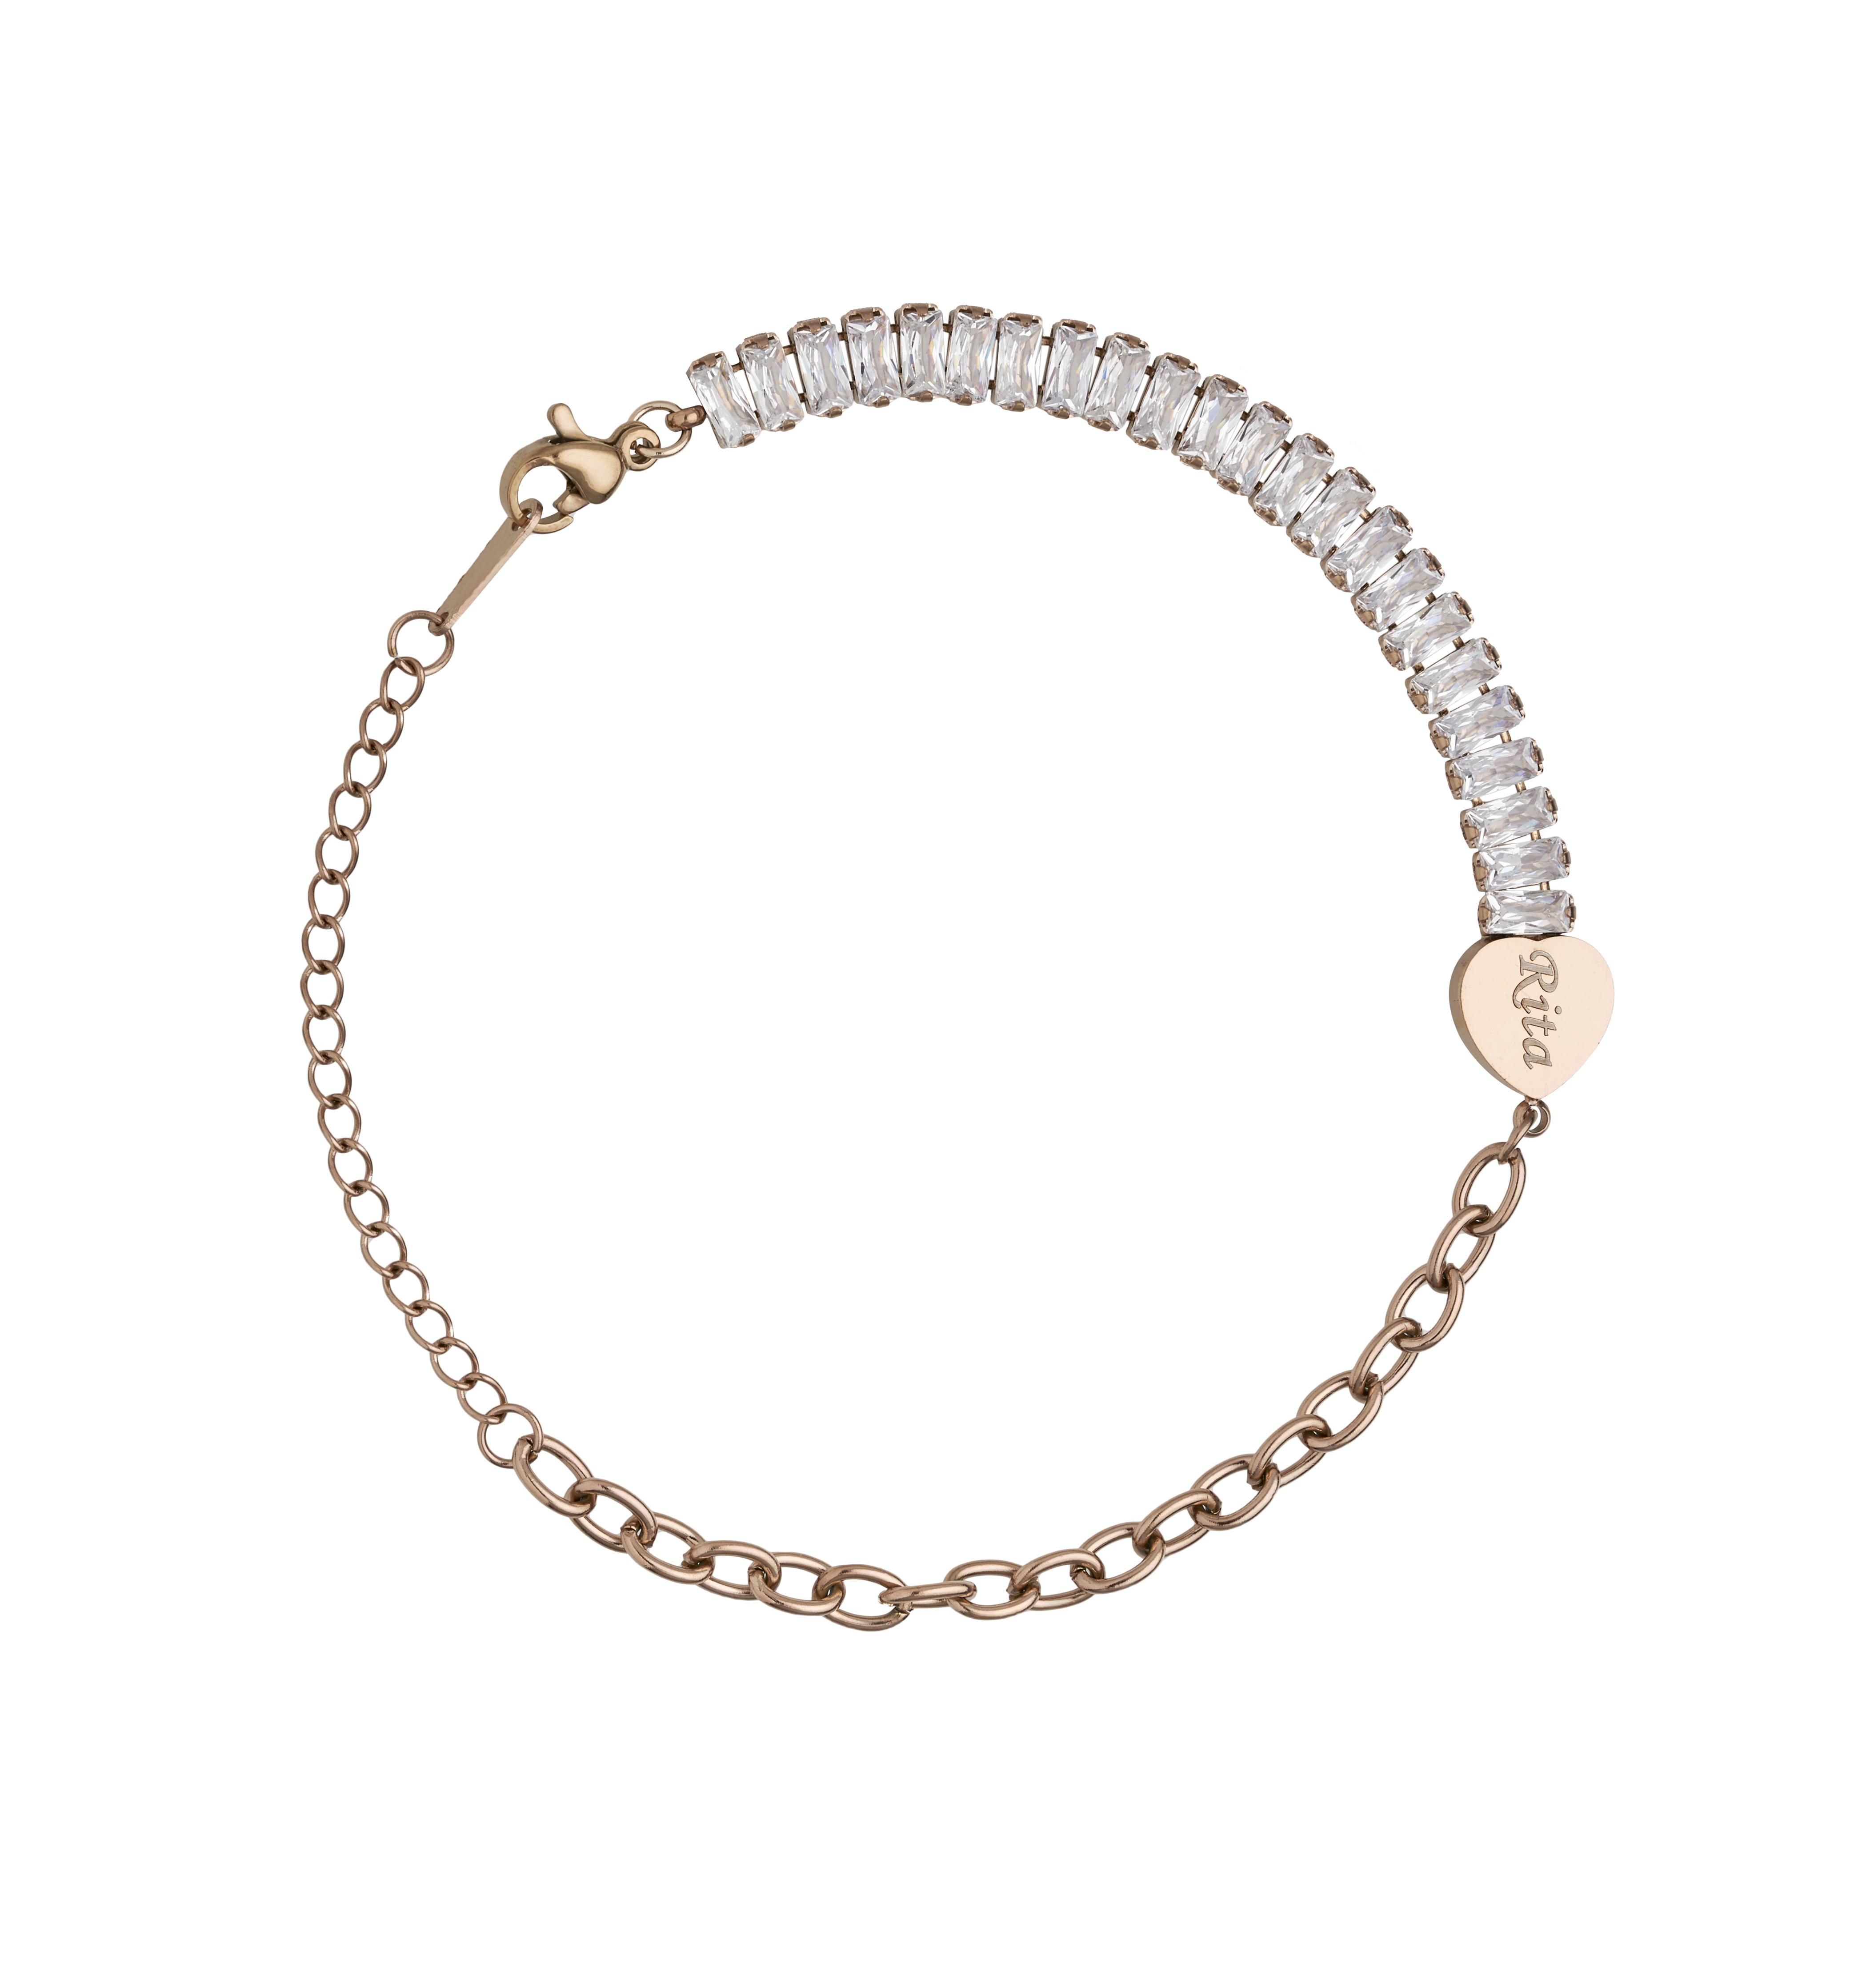 Buy Fancy Friendship Bracelets Online at Low Prices in India - Amazon.in